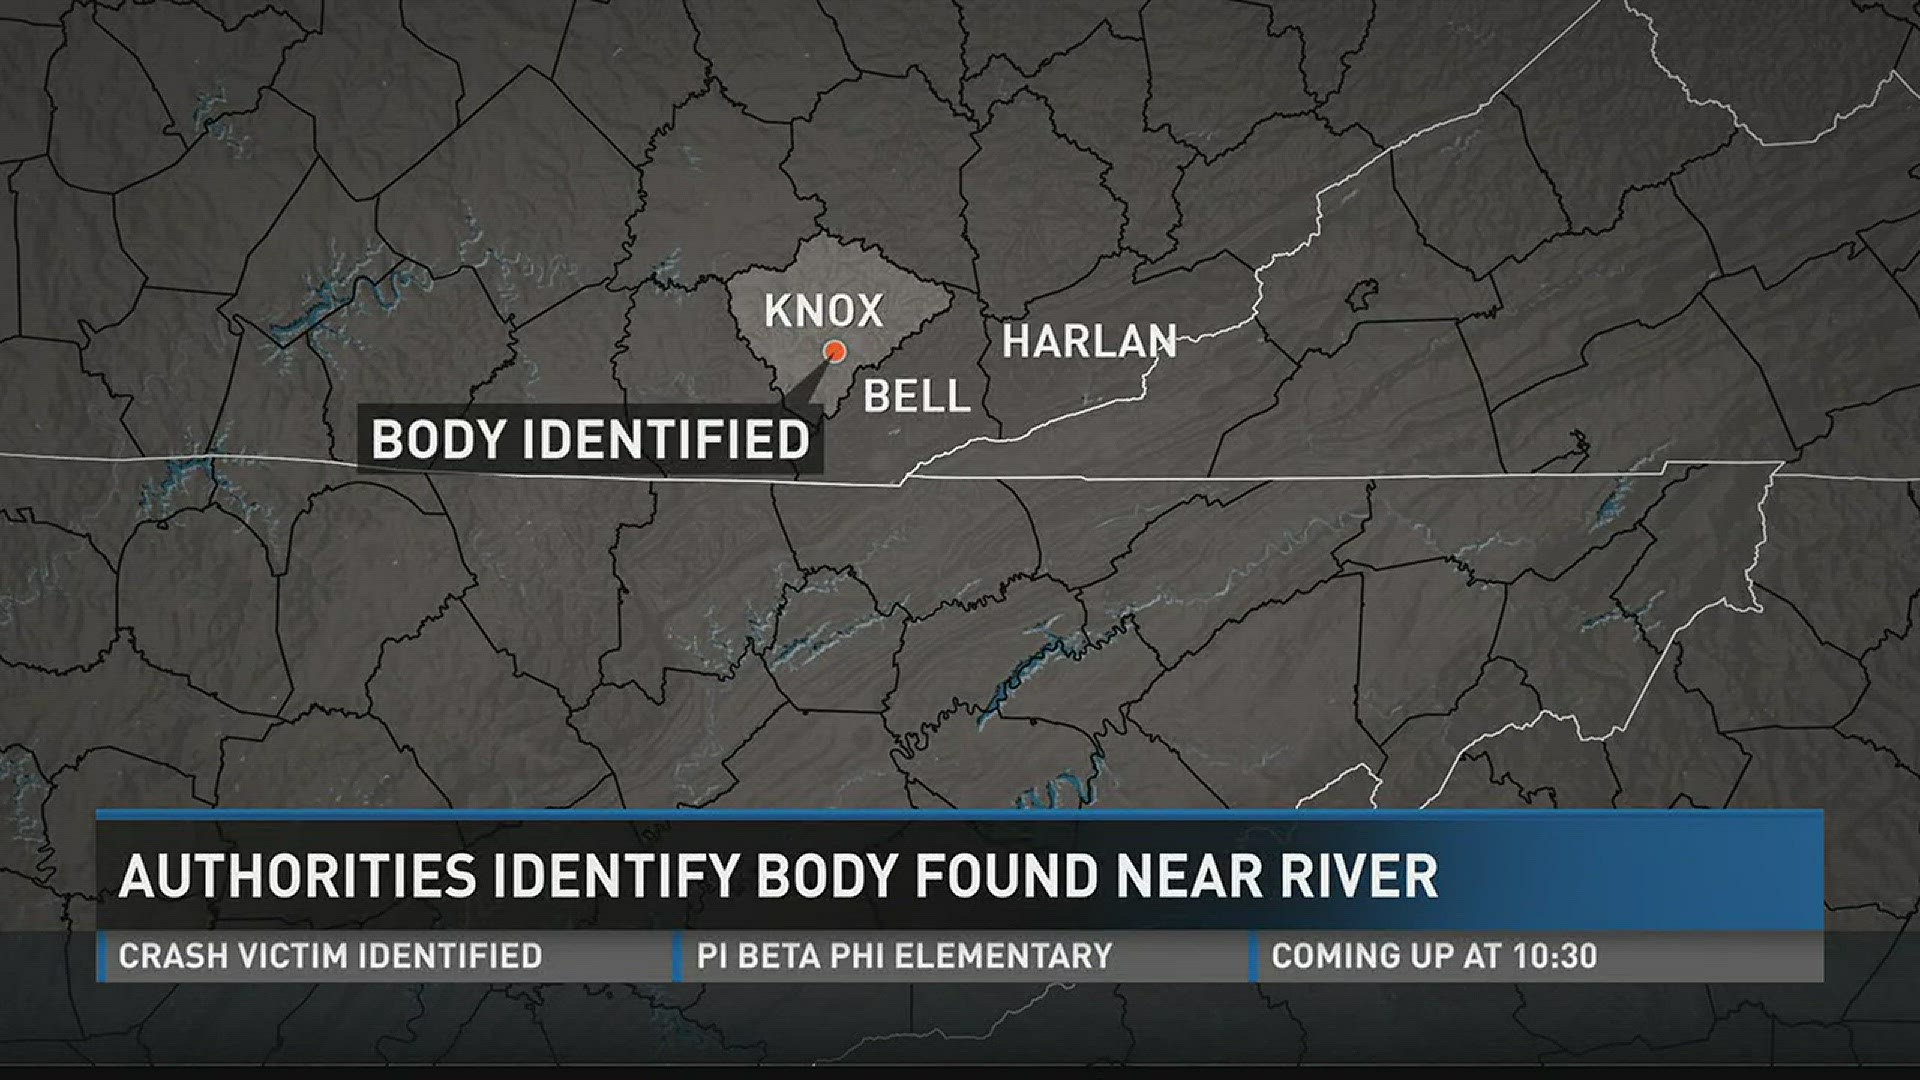 Feb. 20, 2017: Kentucky authorities identified a body found in the Cumberland River.